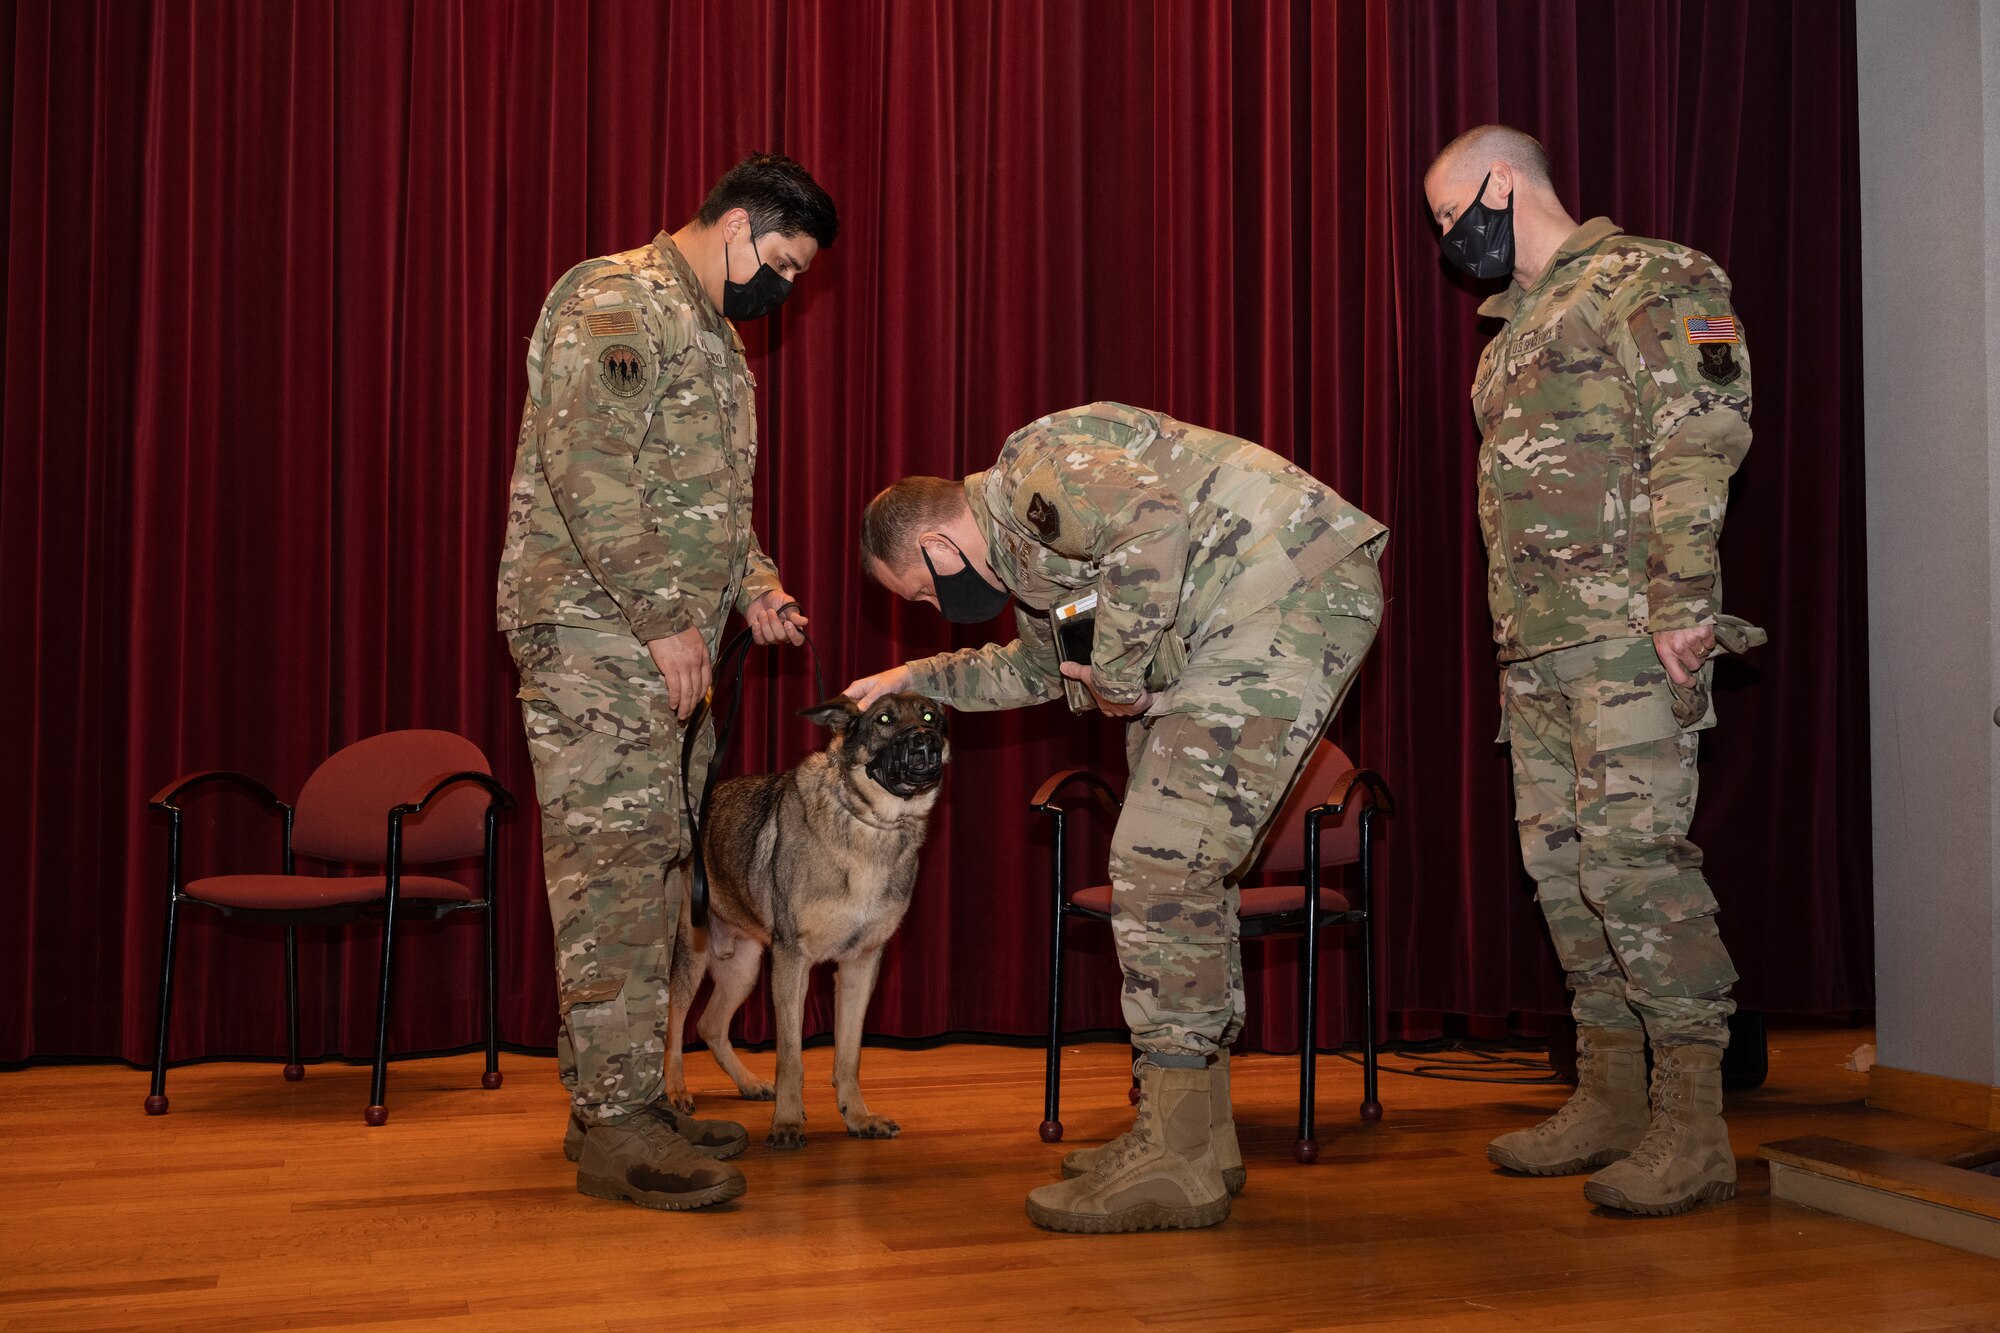 U.S. Air Force Chief Master Sgt. Jason Hodges, 509th Bomb Wing command chief, and U.S. Space Force Col. Christopher Schlak, 509th Mission Support Group commander, congratulate U.S. Air Force Staff Sgt. Alex Villalpando, 509 Security Forces military working dog handler, and MWD Stiffler on Stiffler's retirement at the Whiteman Air Force Base theater Feb. 4, 2022. Military working dogs provide a valuable force multiplier to aid in security and readiness within our units. (U.S. Air Force photo by Airman 1st Class Bryson Britt)